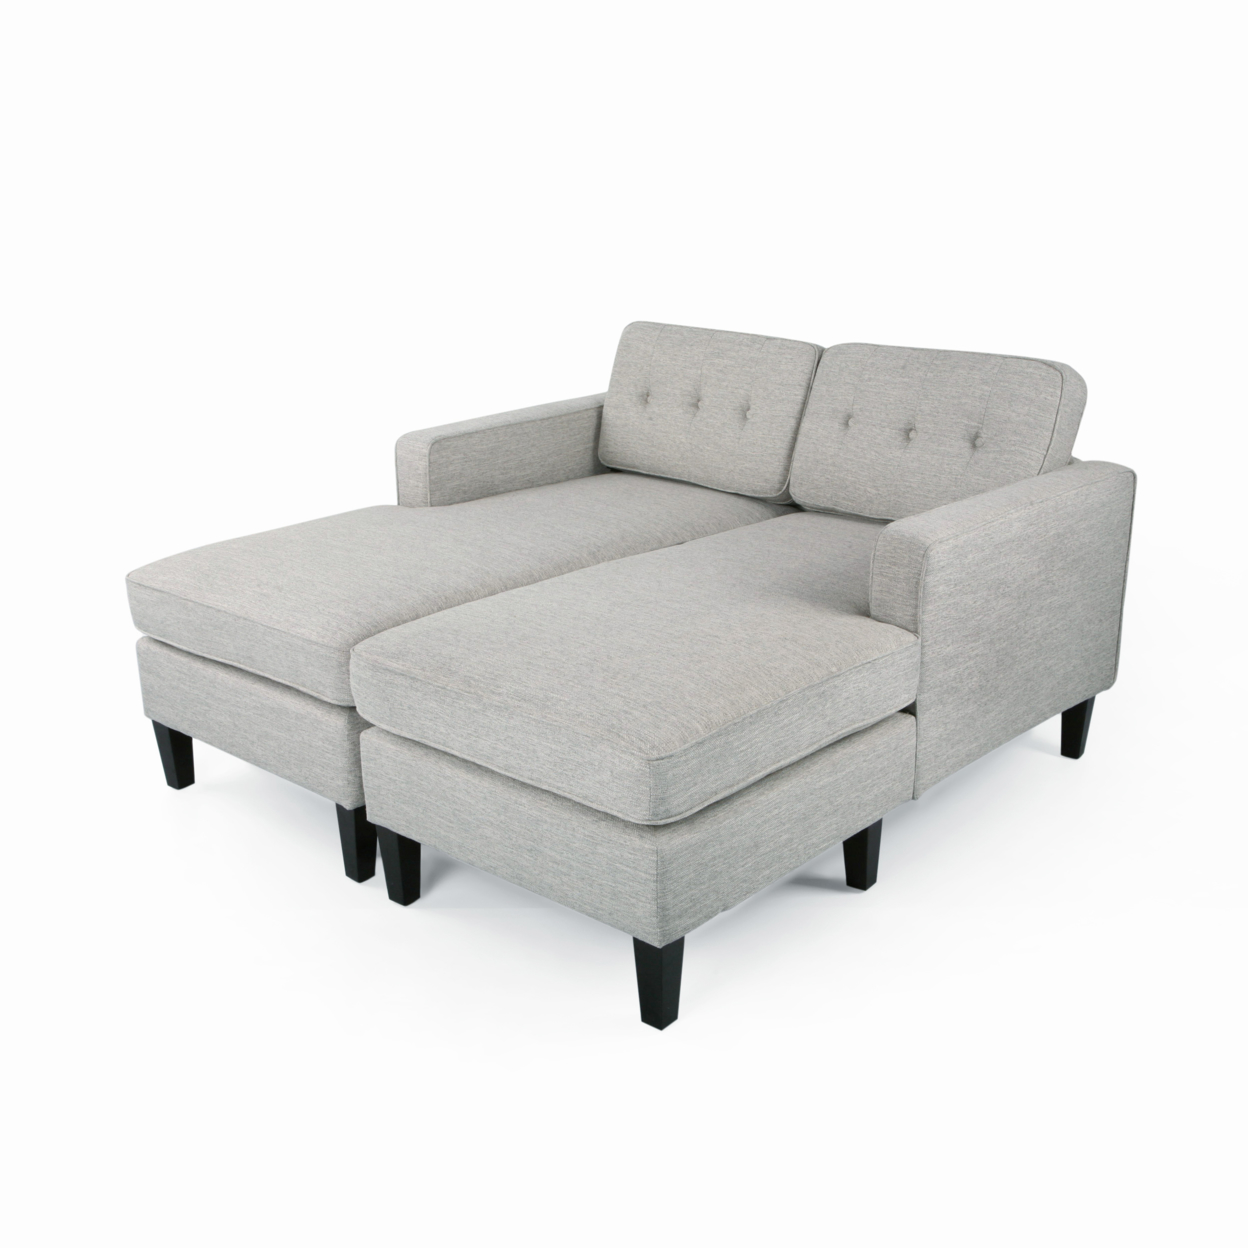 Jean Modern Fabric Double Chaise Daybed